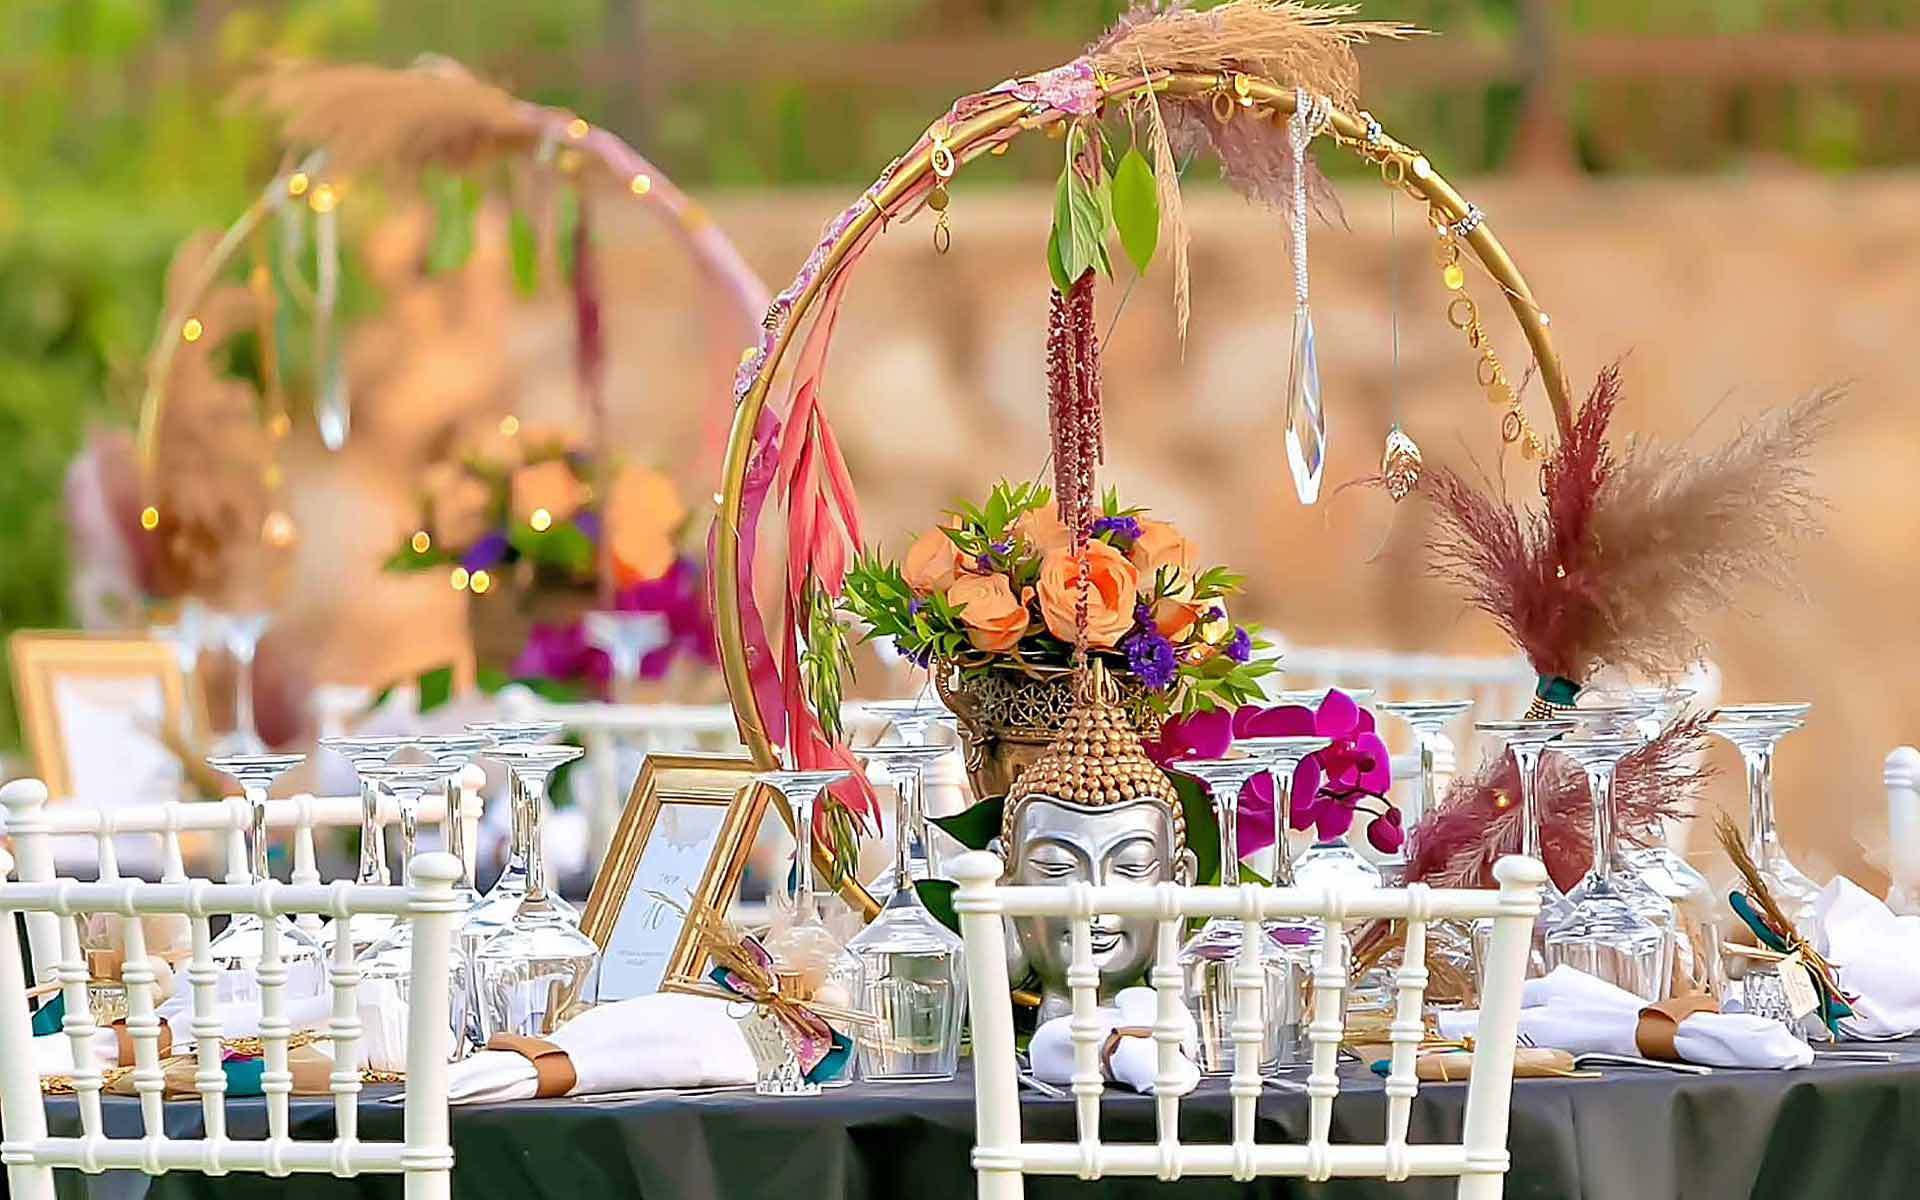 The circle of life decorated with pampas grass and natural roses used as a centerpiece alongside a gold urn and decorative Buddha figure inspired by the East culture